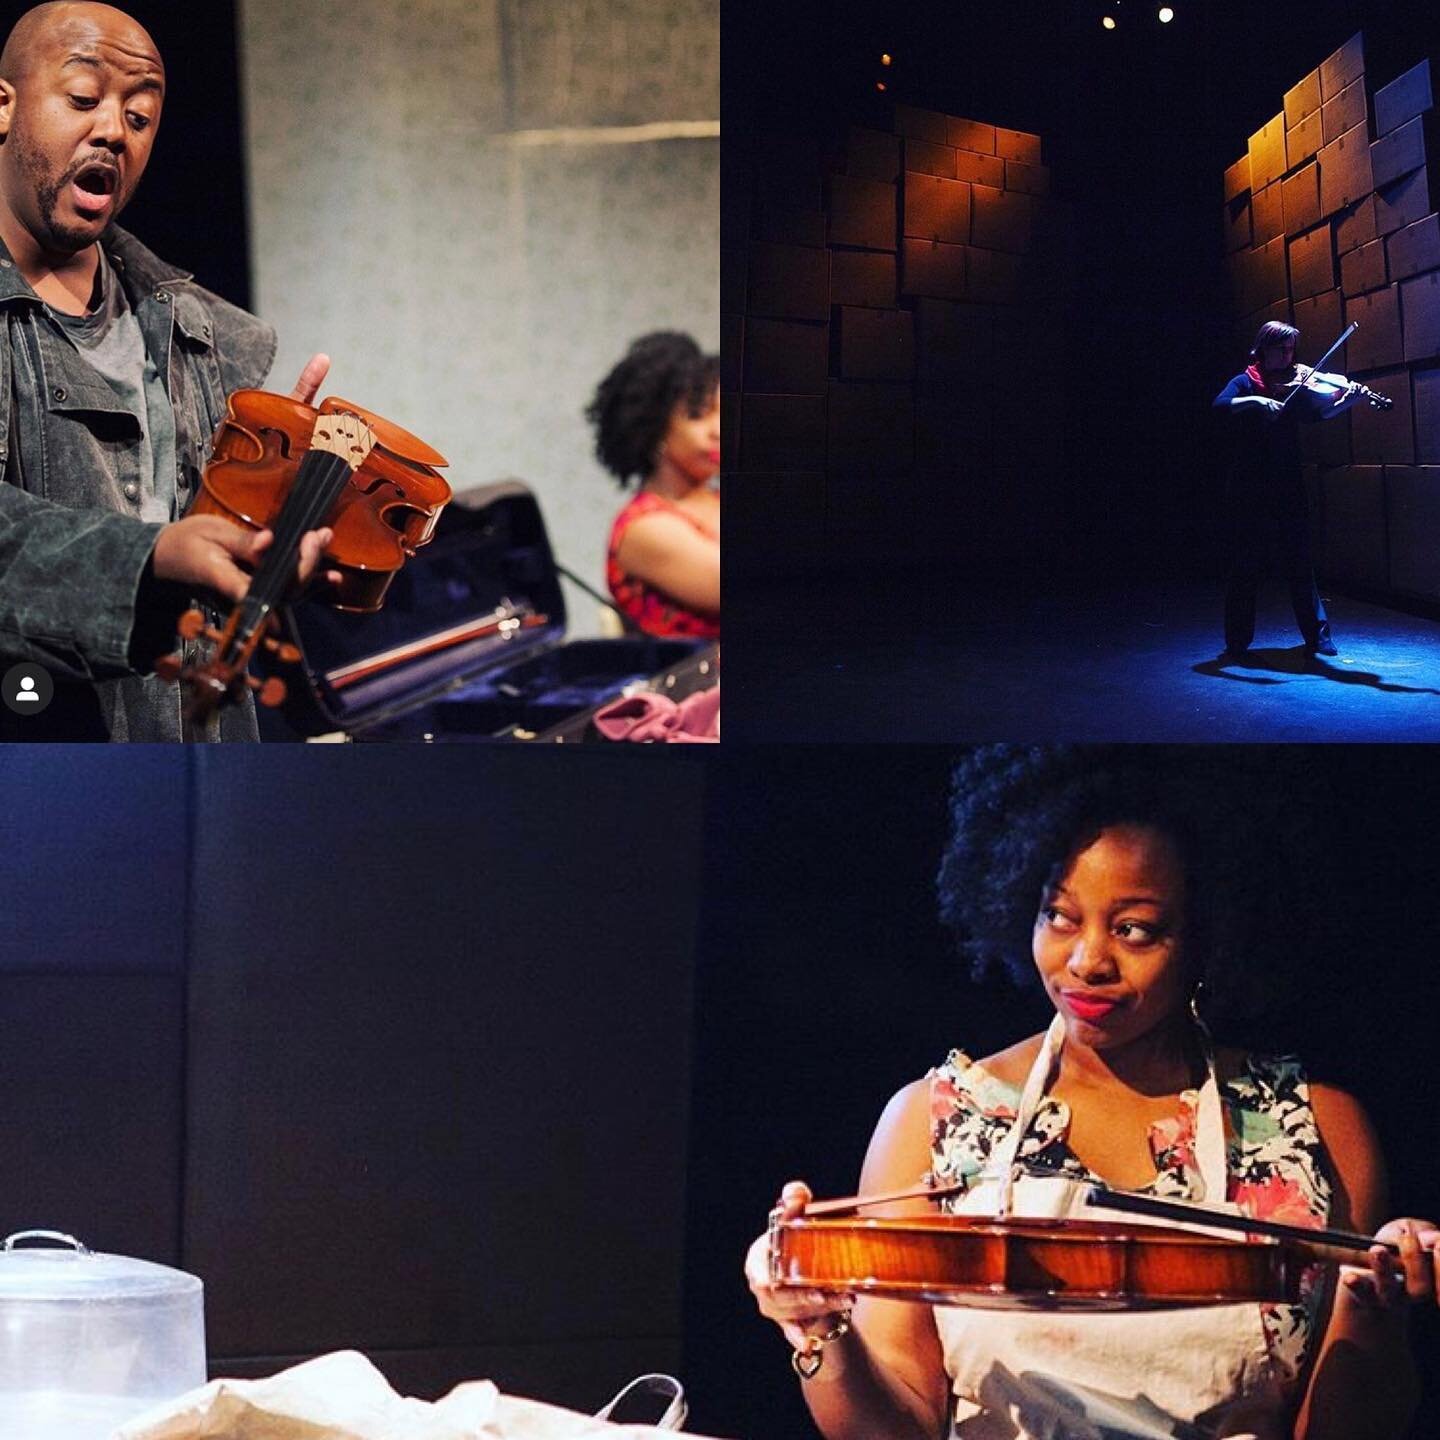 &ldquo;Blue Viola&rdquo; goes back in its case tonight! It&rsquo;s your last day to see @urbanarias production, directed by #tazewellthompson, and starring @alicia_olatuja, @jorellogram, @keithphares, @ben_lurye_sings_high, and @inscapeco. Head to th